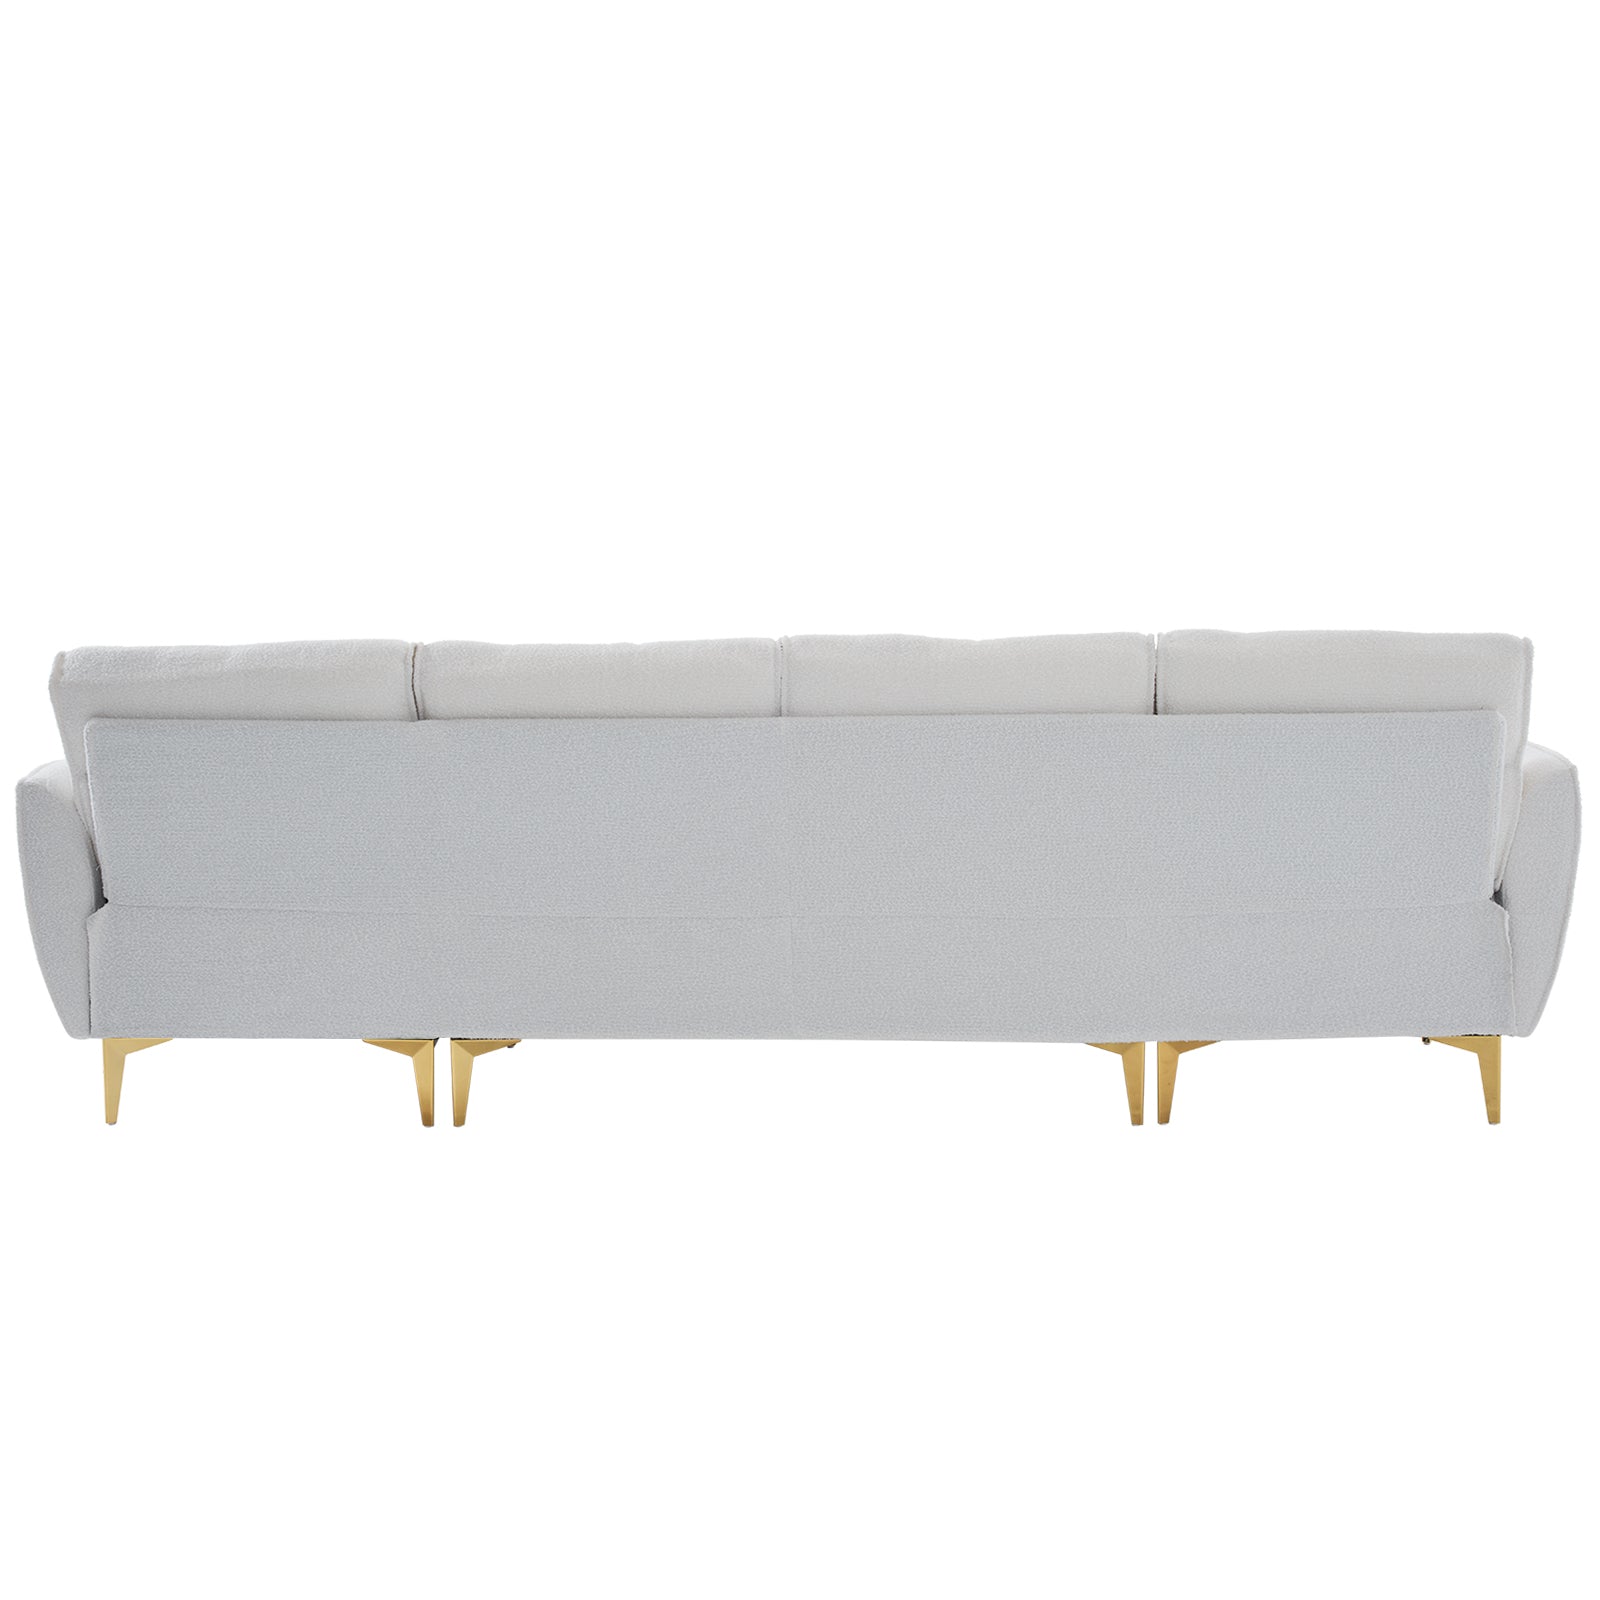 Burke 112" Beige Boucle Sectional Sofa with Gold Metal Legs